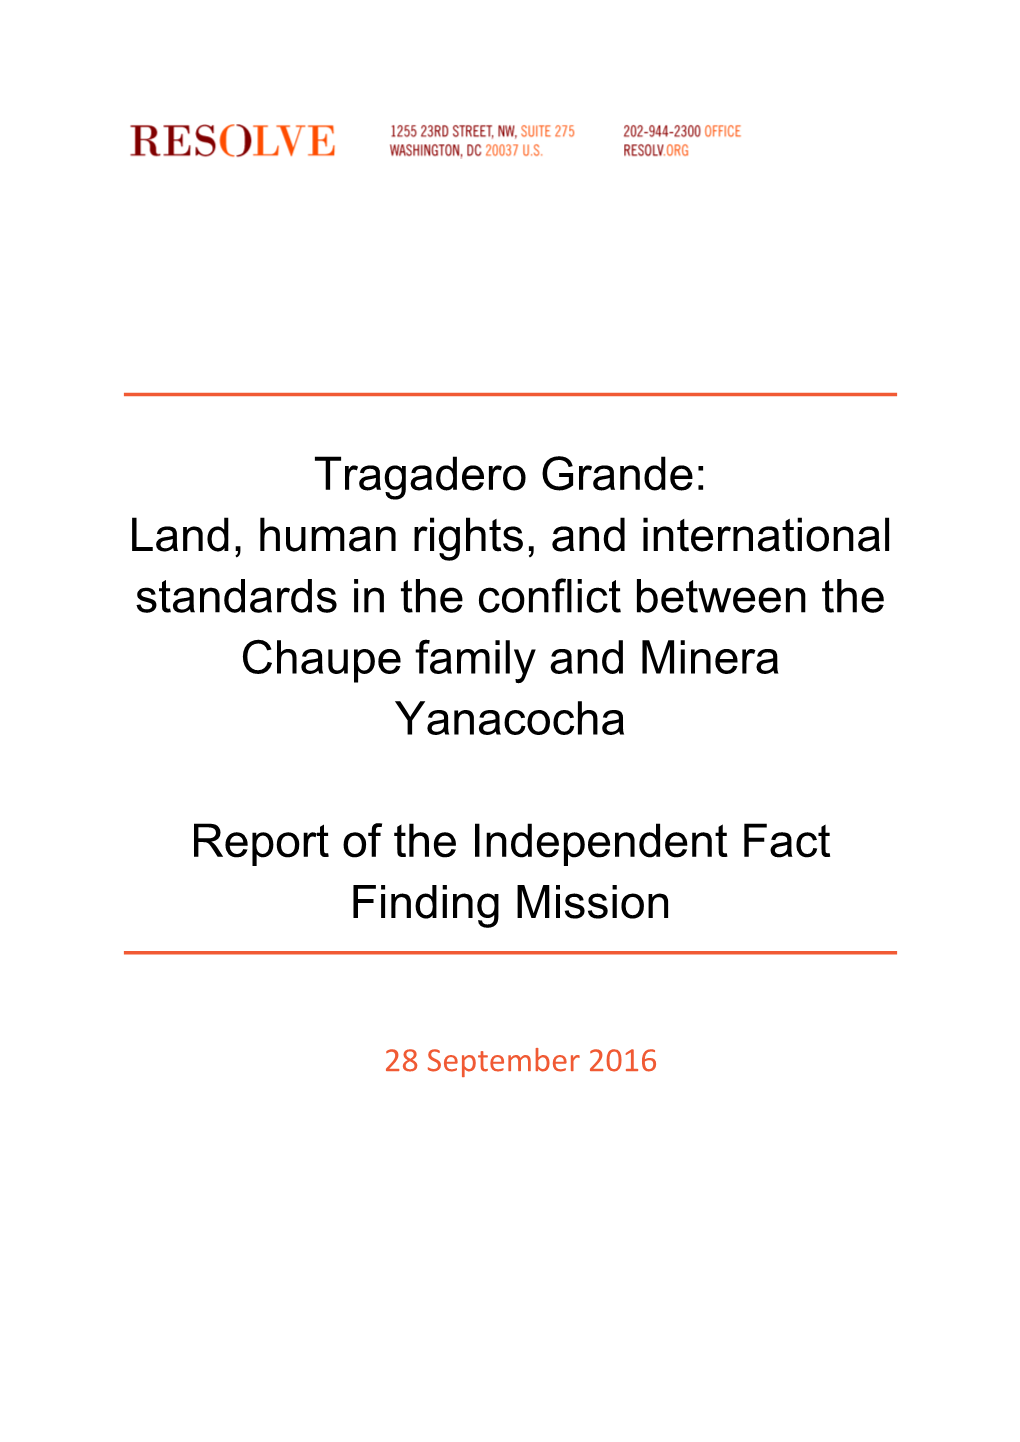 Tragadero Grande: Land, Human Rights, and International Standards in the Conflict Between the Chaupe Family and Minera Yanacocha